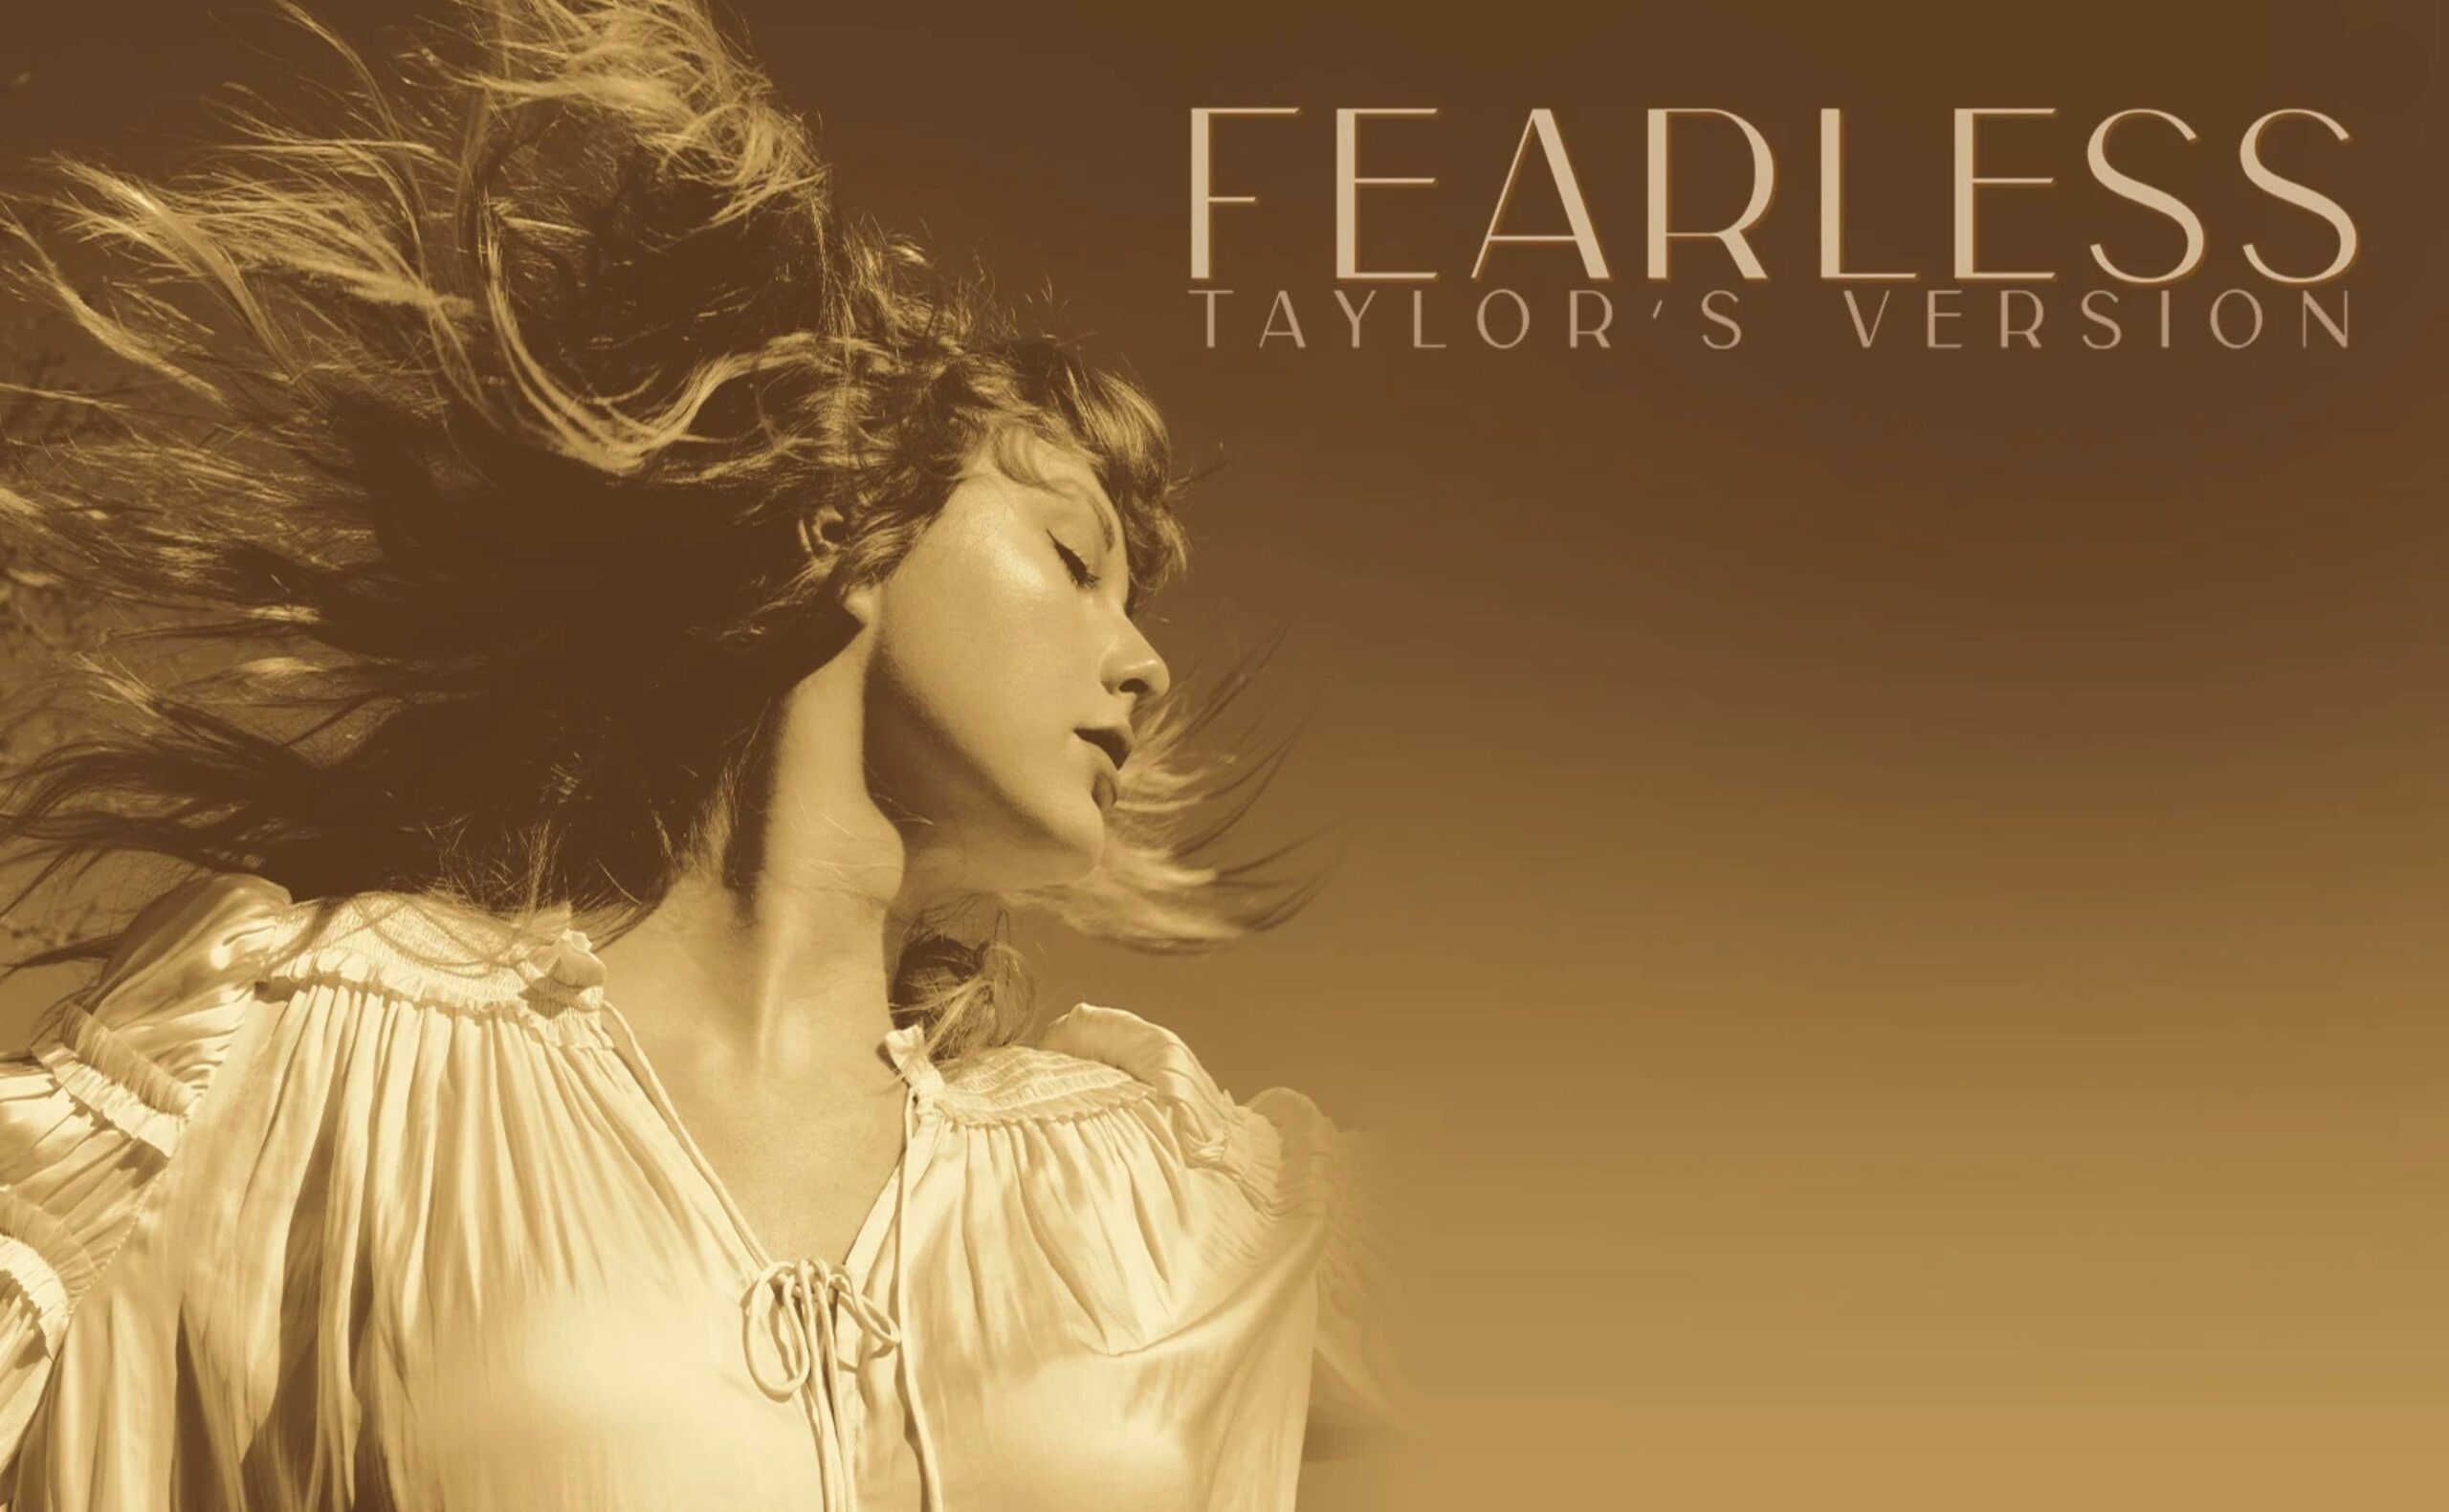 Is Fearless Taylor’s version out?